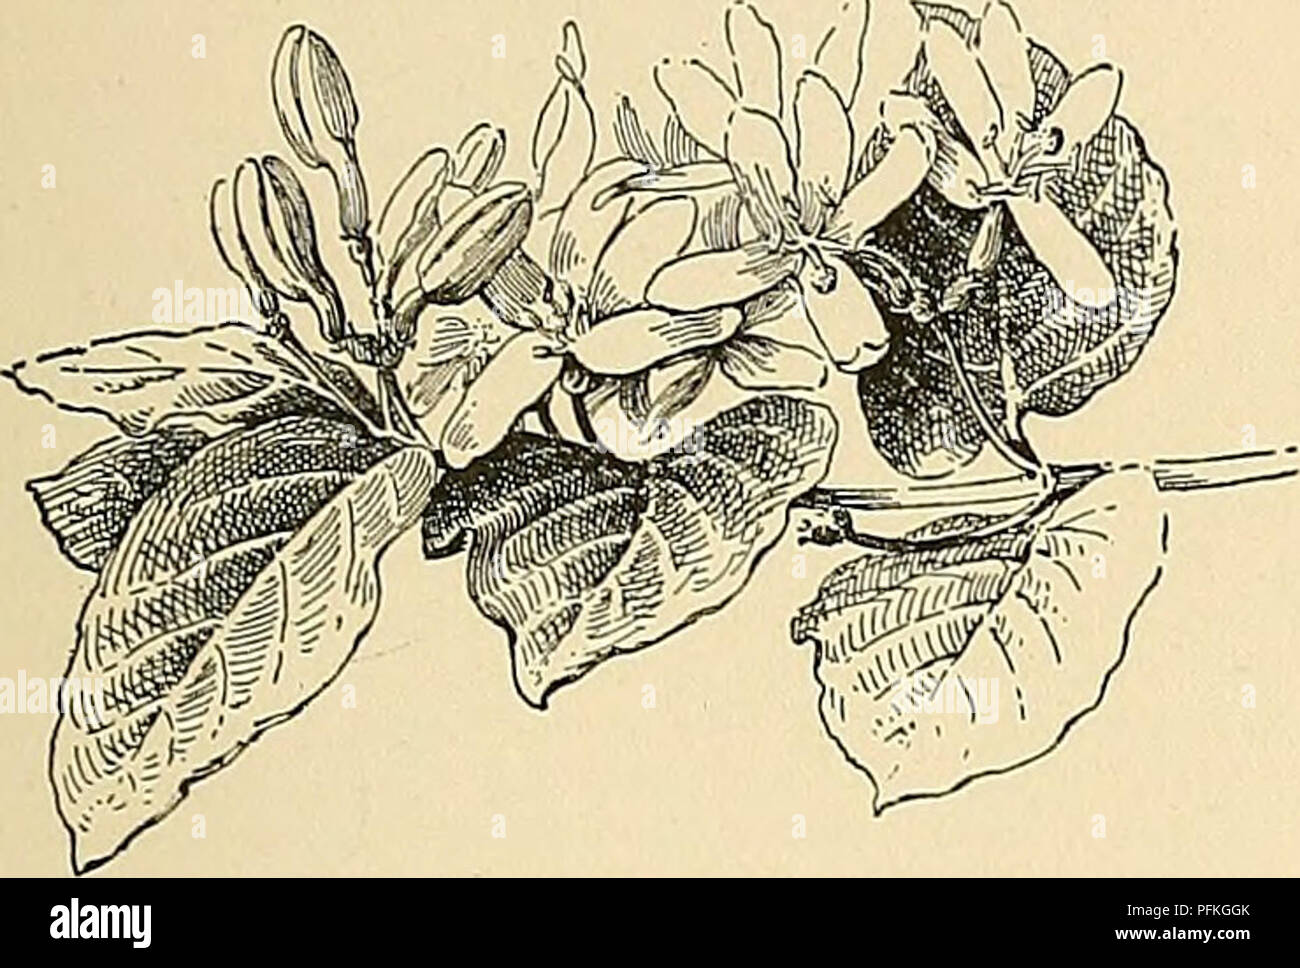 . Cyclopedia of American horticulture, comprising suggestions for cultivation of horticultural plants, descriptions of the species of fruits, vegetables, flowers, and ornamental plants sold in the United States and Canada, together with geographical and biographical sketches. Gardening. LONICERA LONICERA 941 11. fragrantissima, Cai-r. {L., or Cuprifoliiim, Nla- guarilU, Hort.). Similar to the former, but with long and slender recurving and almost glabrous branches: Ivs. broadly ovate or obovate, acute, almost glabrous, but bristly on the midrib beneath and ciliate, 1-2J^ in. long: corolla glab Stock Photo